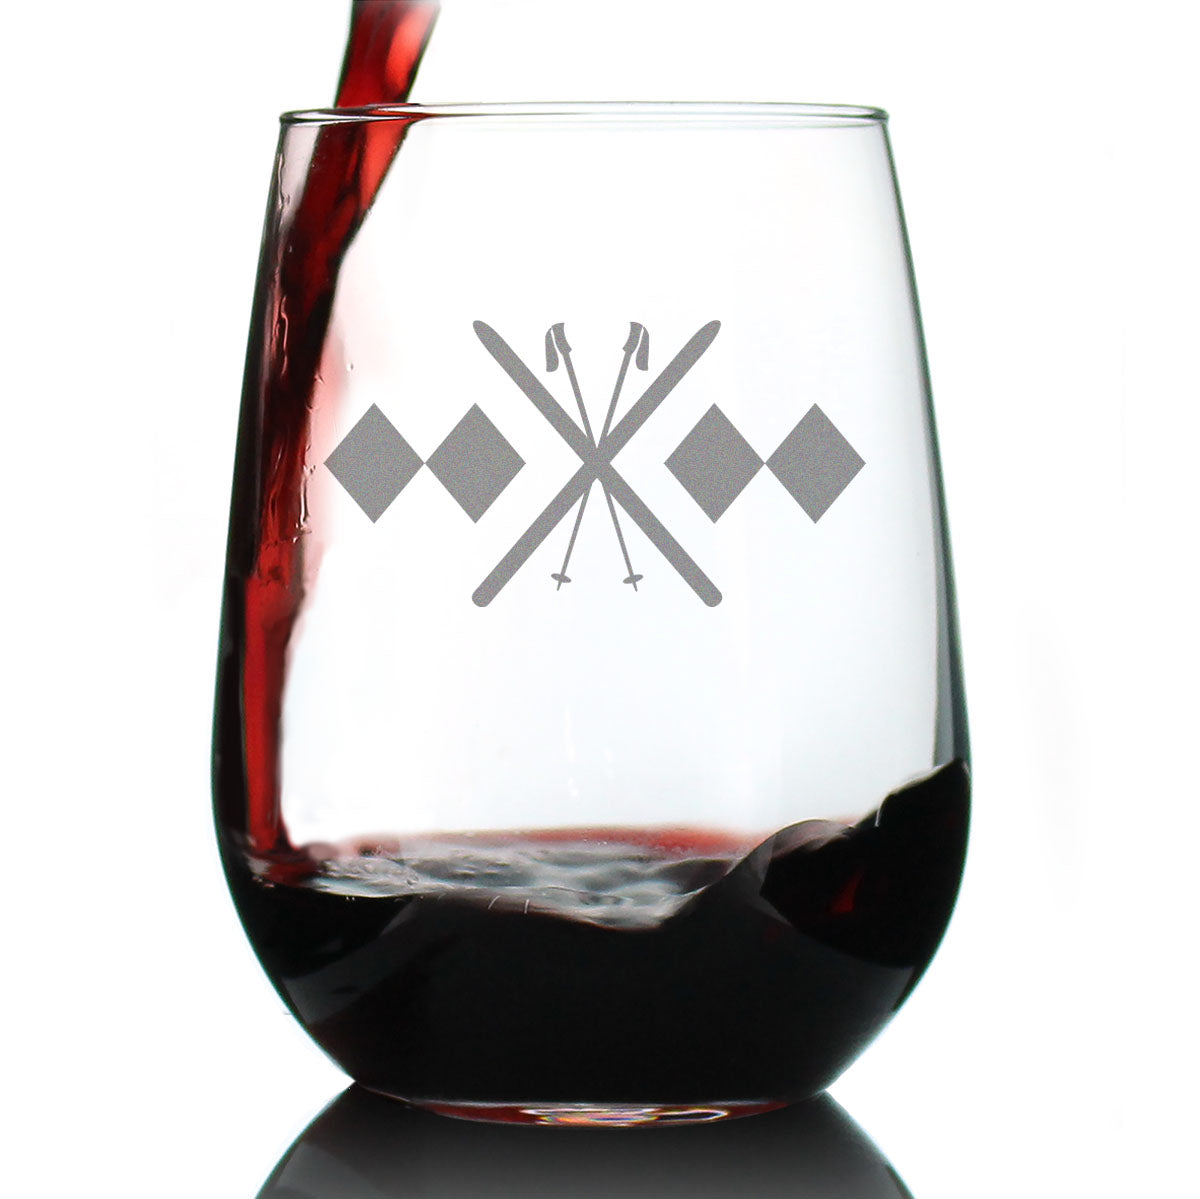 Double Black Diamond - Stemless Wine Glass - Unique Skiing Themed Decor and Gifts for Mountain Lovers - Large 17 Oz Glasses